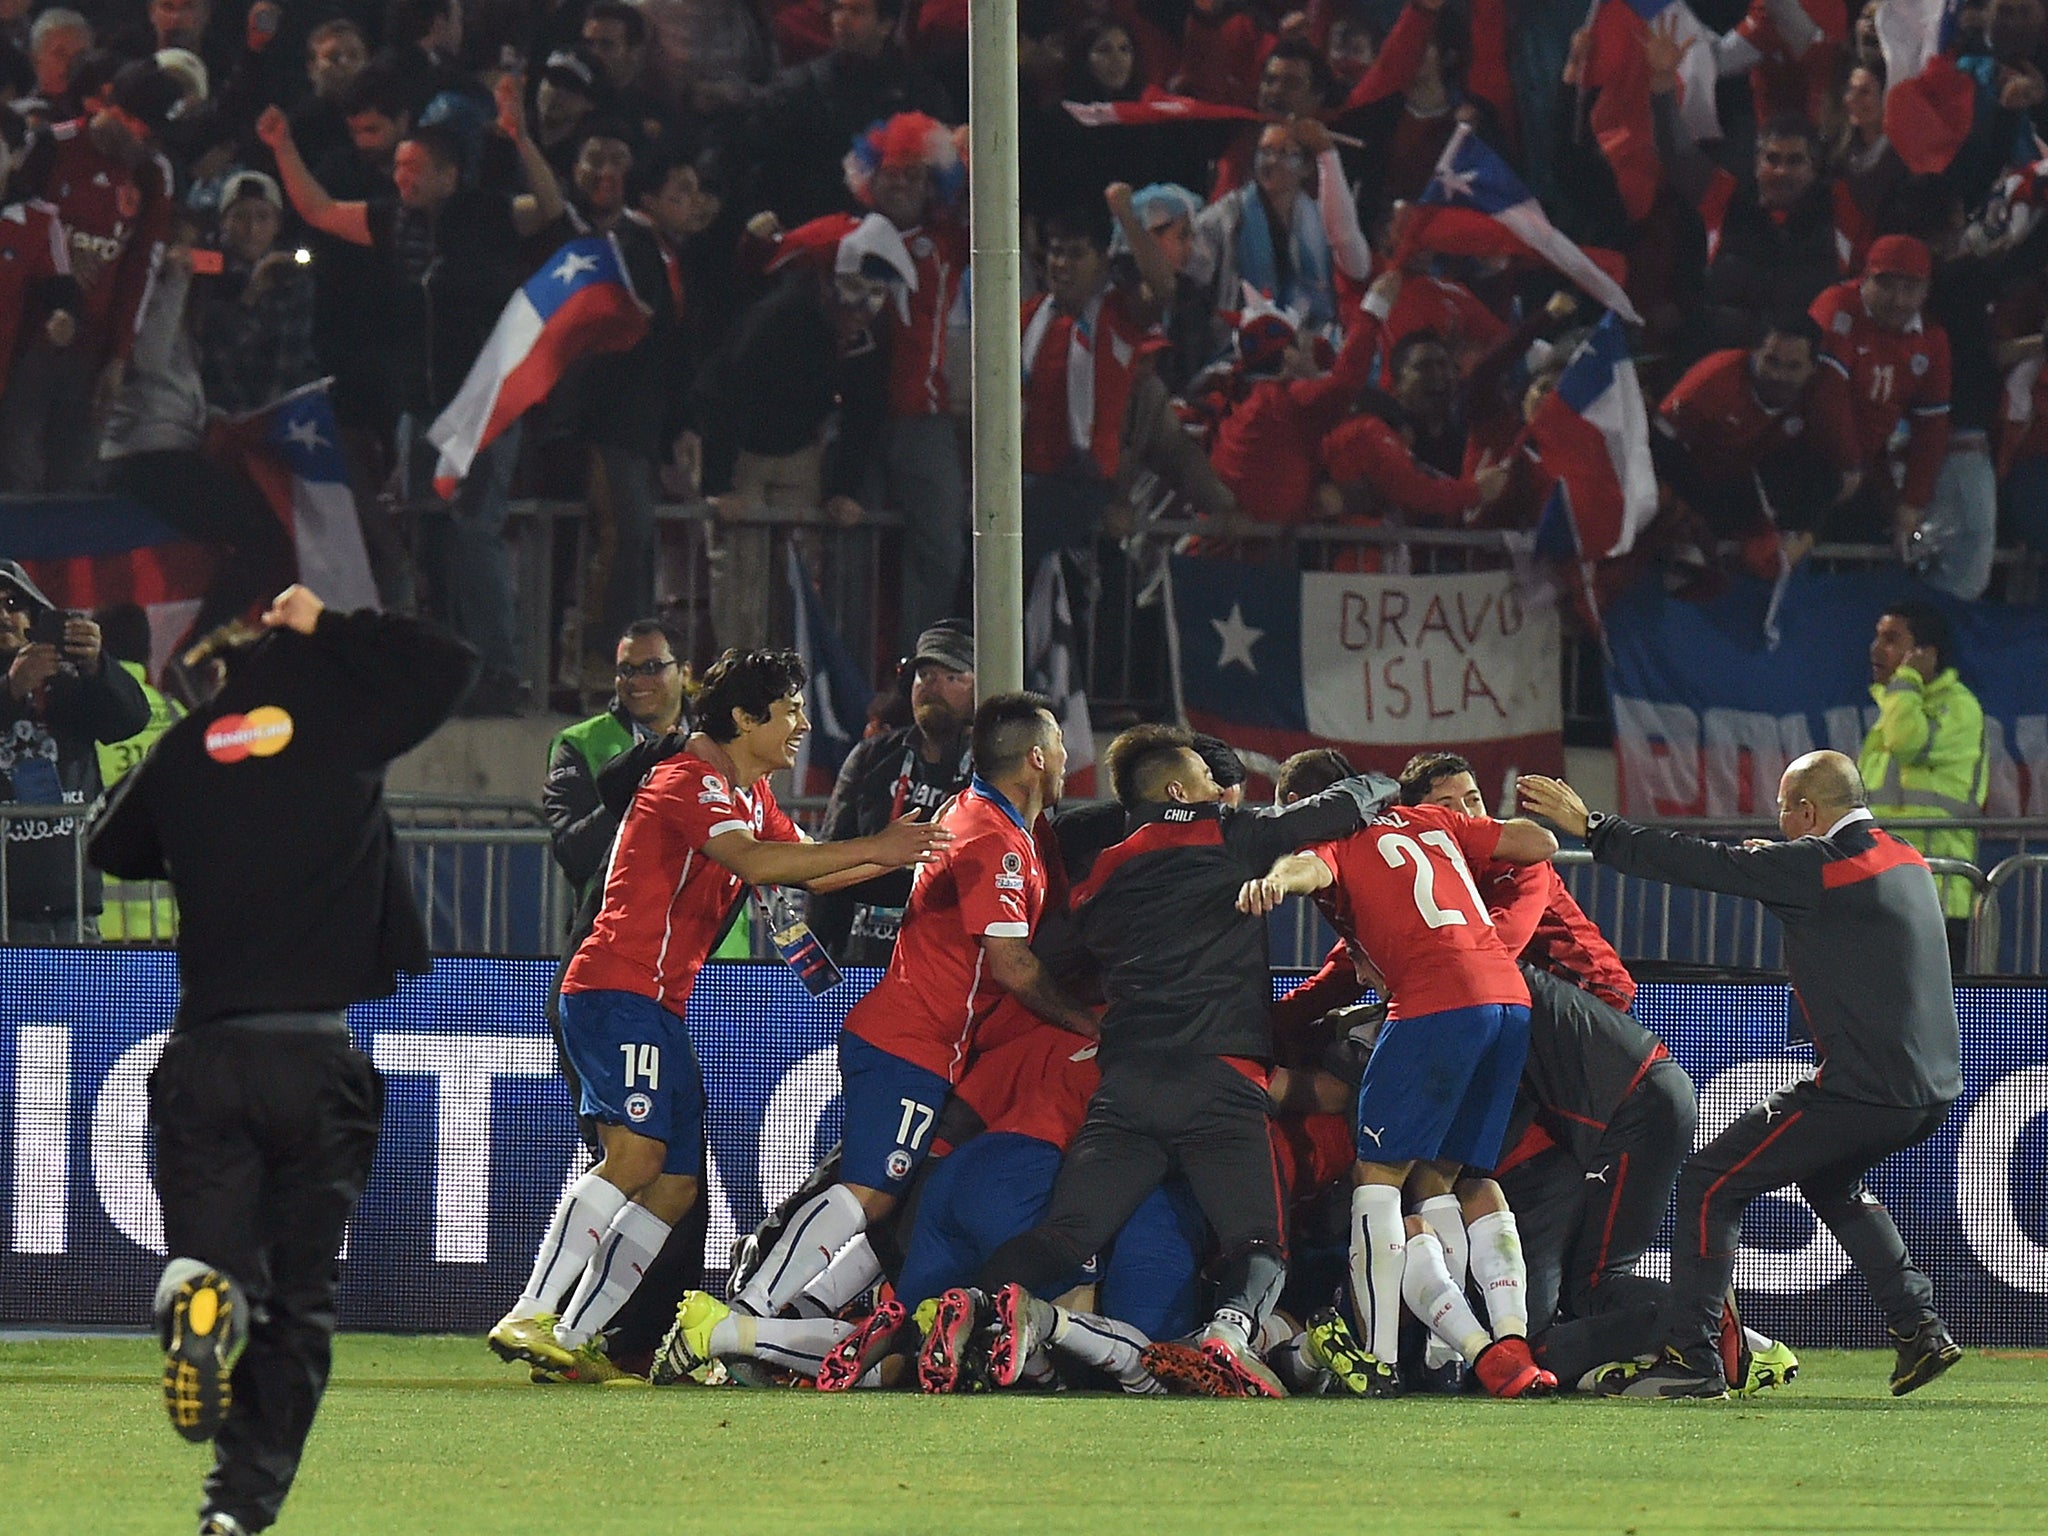 Chile lifted the Copa America with a 4-1 penalty shootout win against Argentina